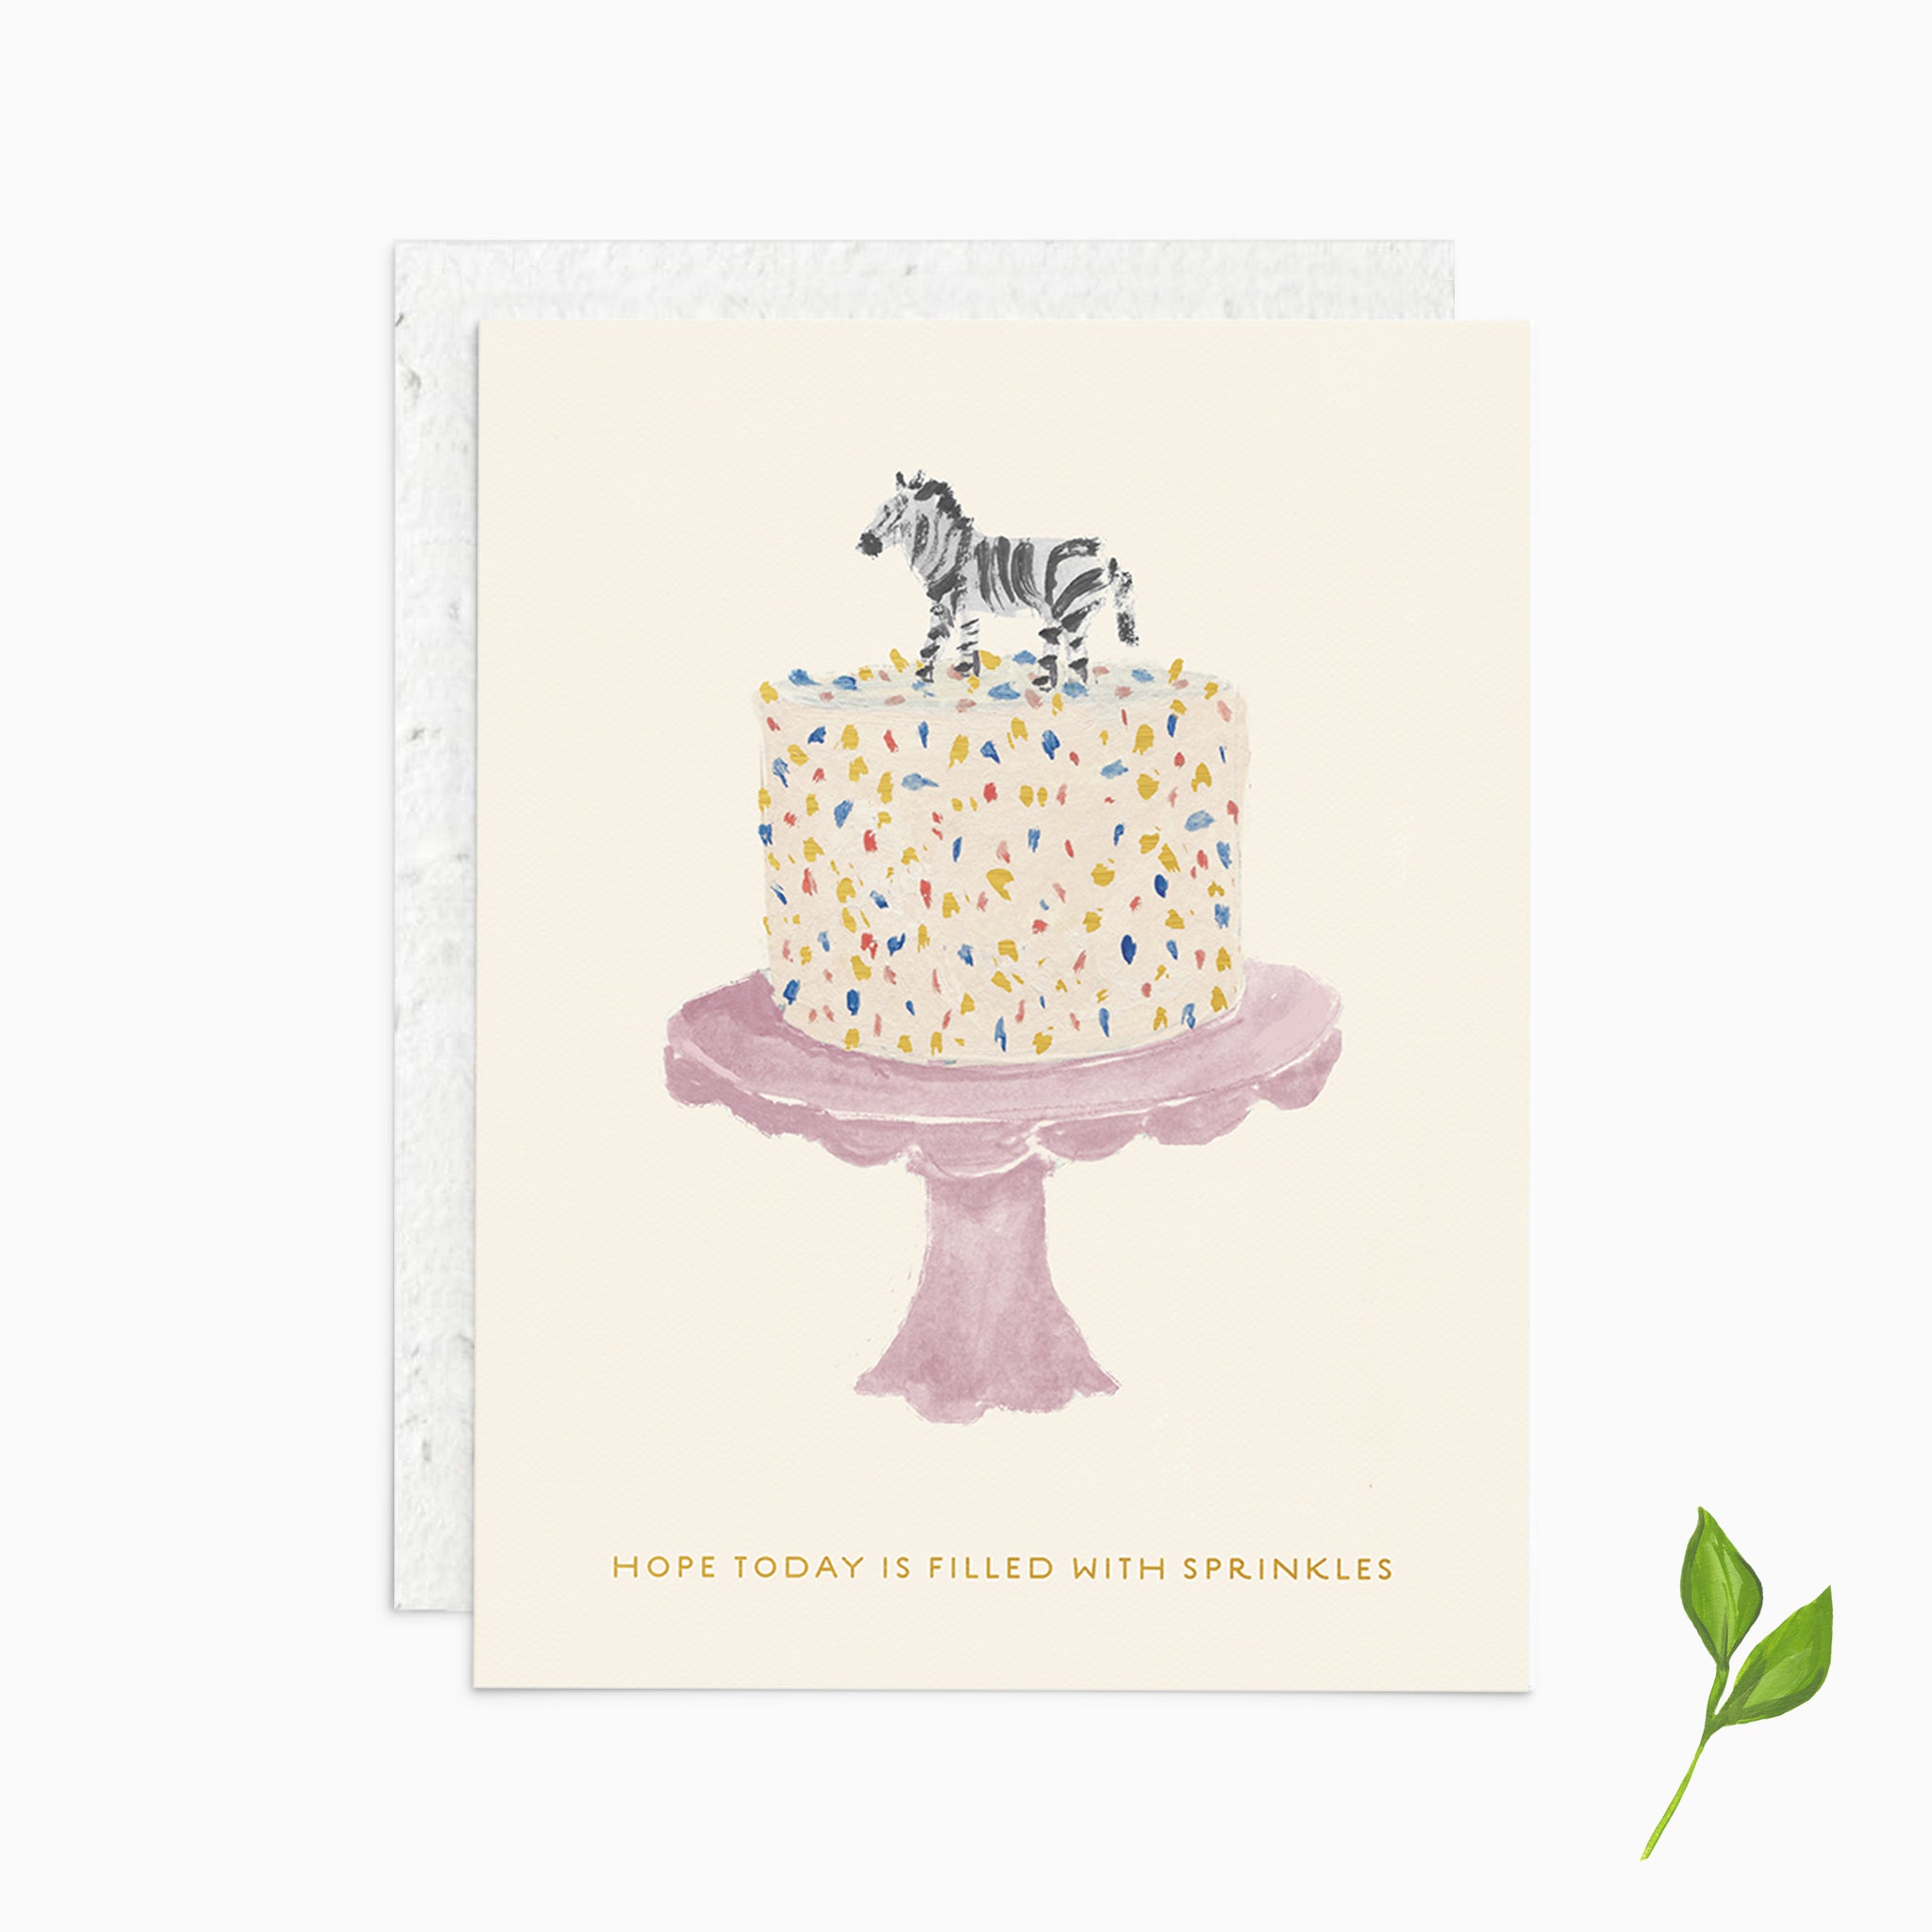 Hope Today is Filled with Sprinkles - Plantable Card